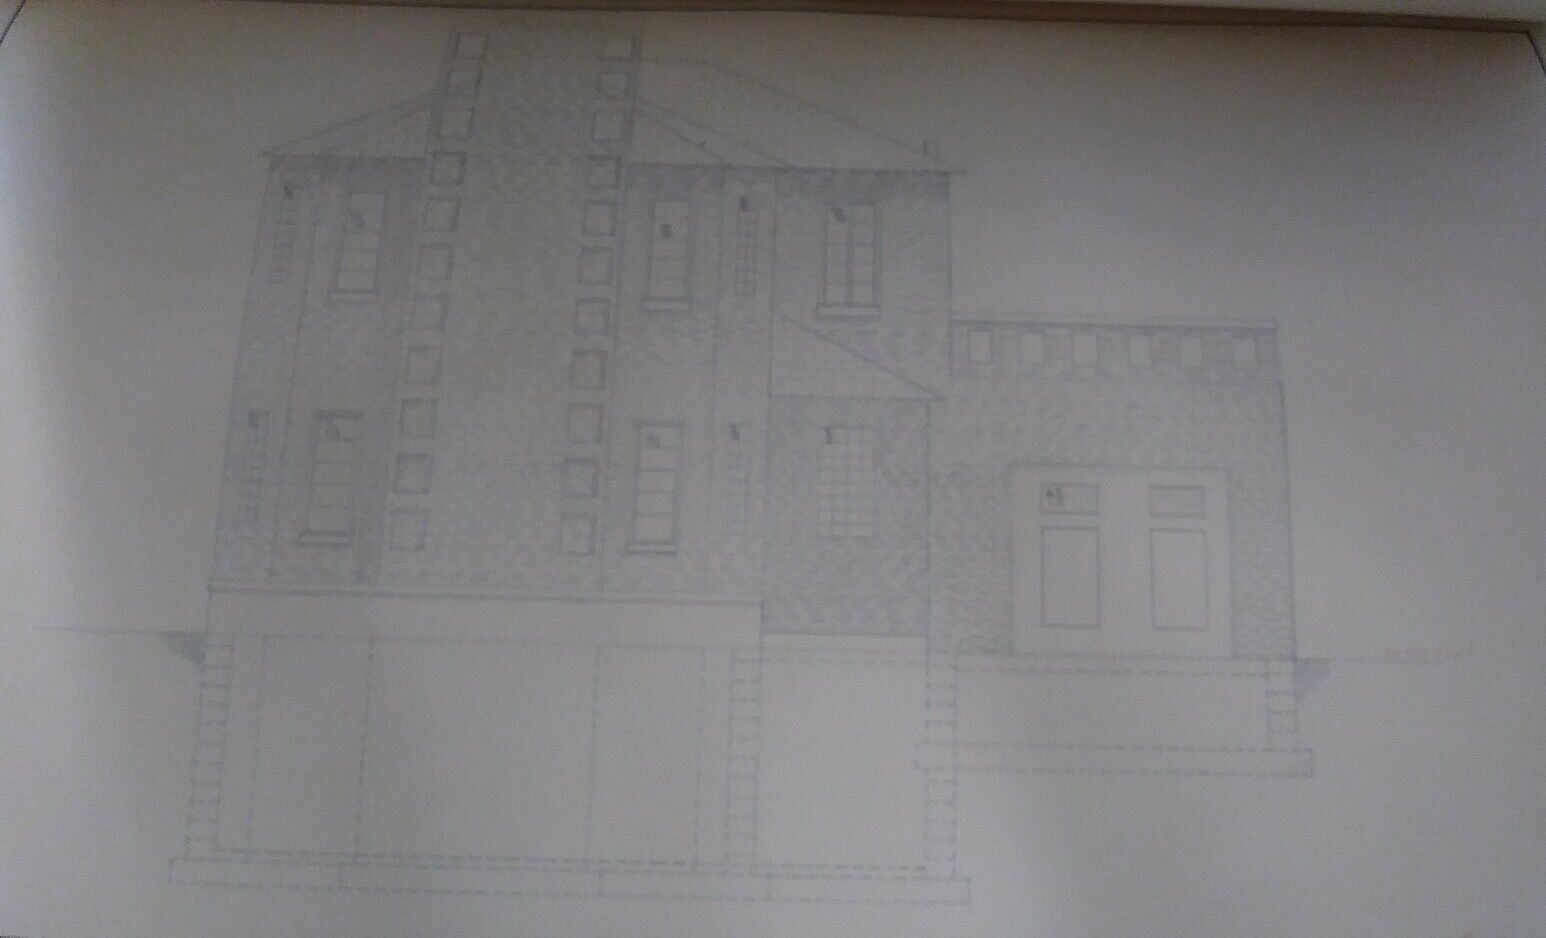 1951 Architectural Drawings Of Jon Collins Later to Become Aeronautical Engineer